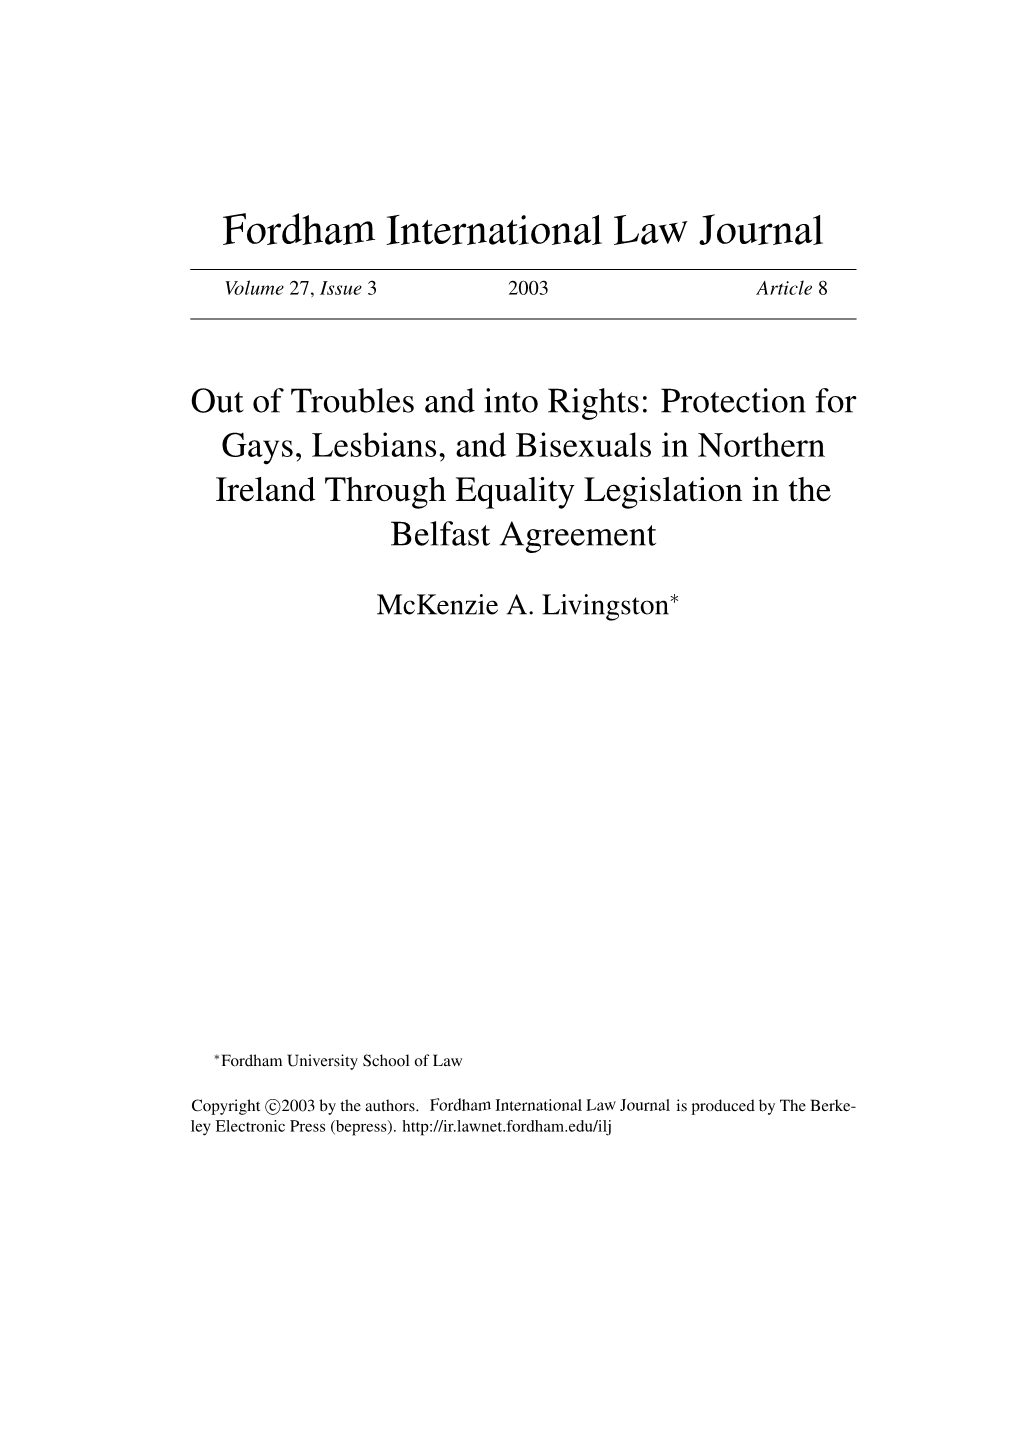 Protection for Gays, Lesbians, and Bisexuals in Northern Ireland Through Equality Legislation in the Belfast Agreement